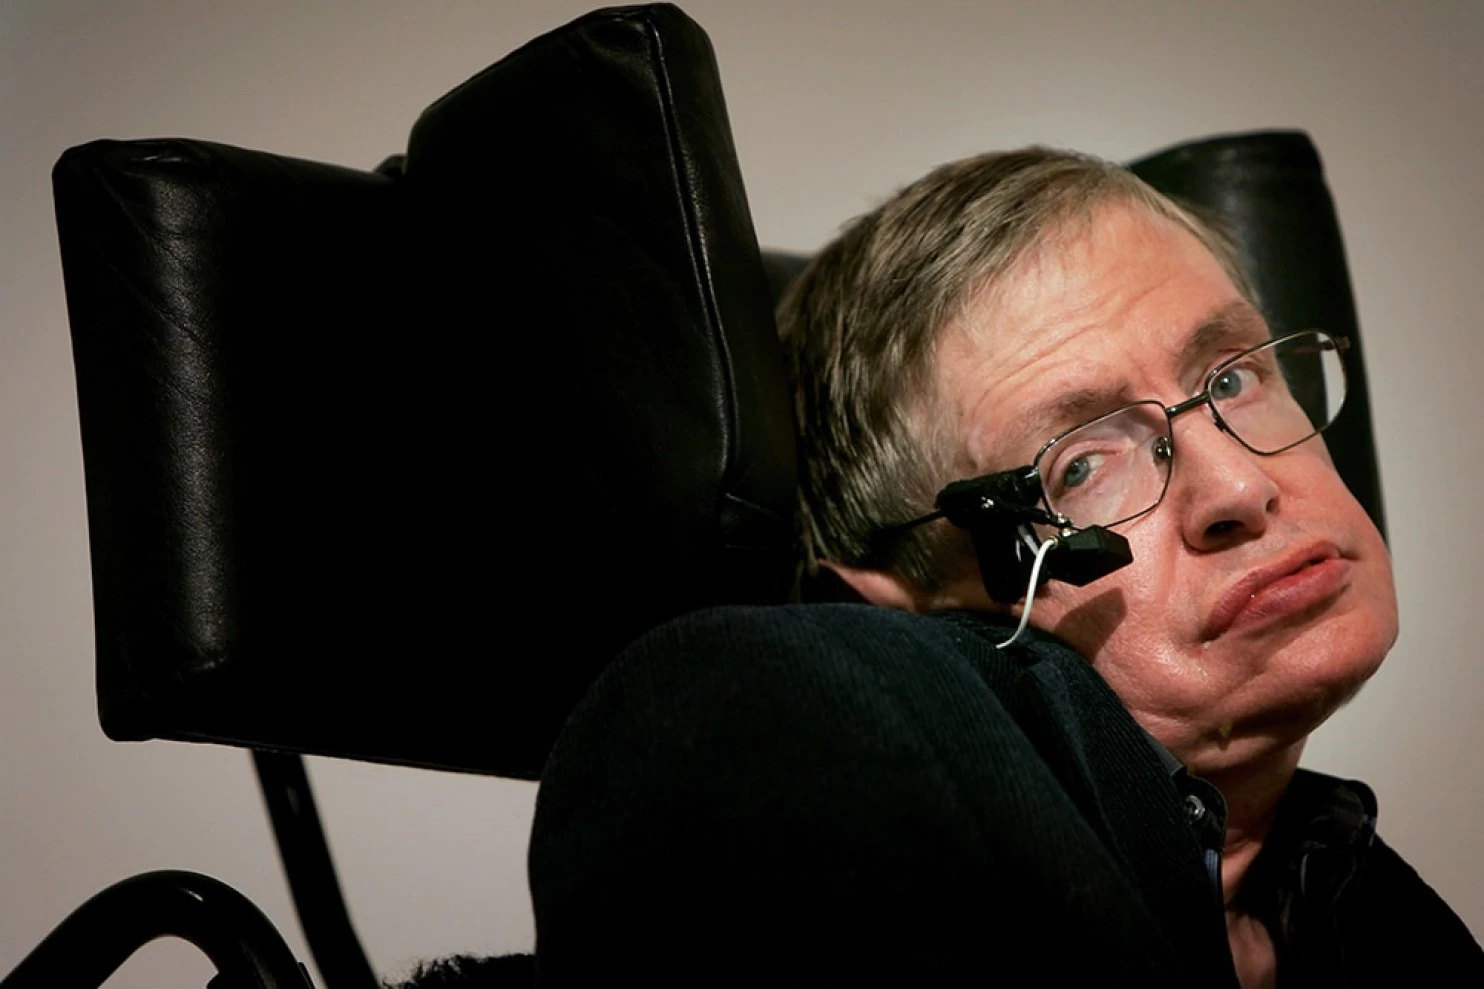 Steven Hocking How Stephen Hawking diagnosed with ALS decades ago is